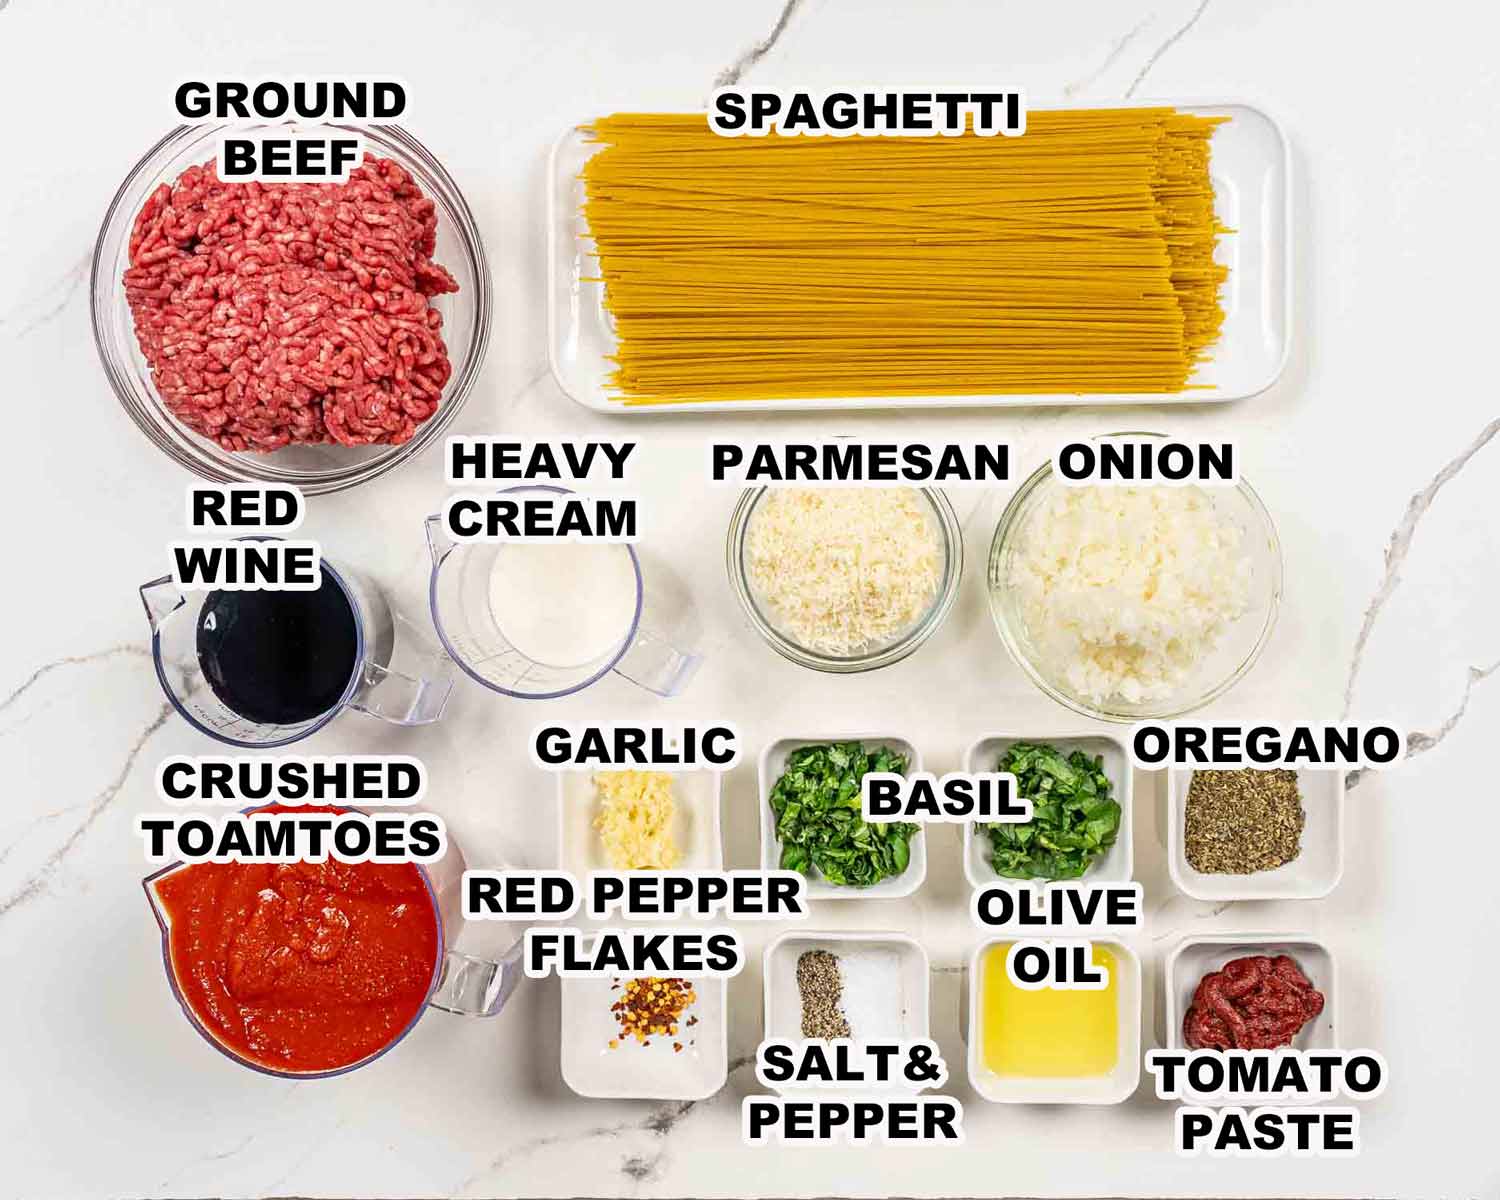 ingredients needed to make spaghetti bolognese.